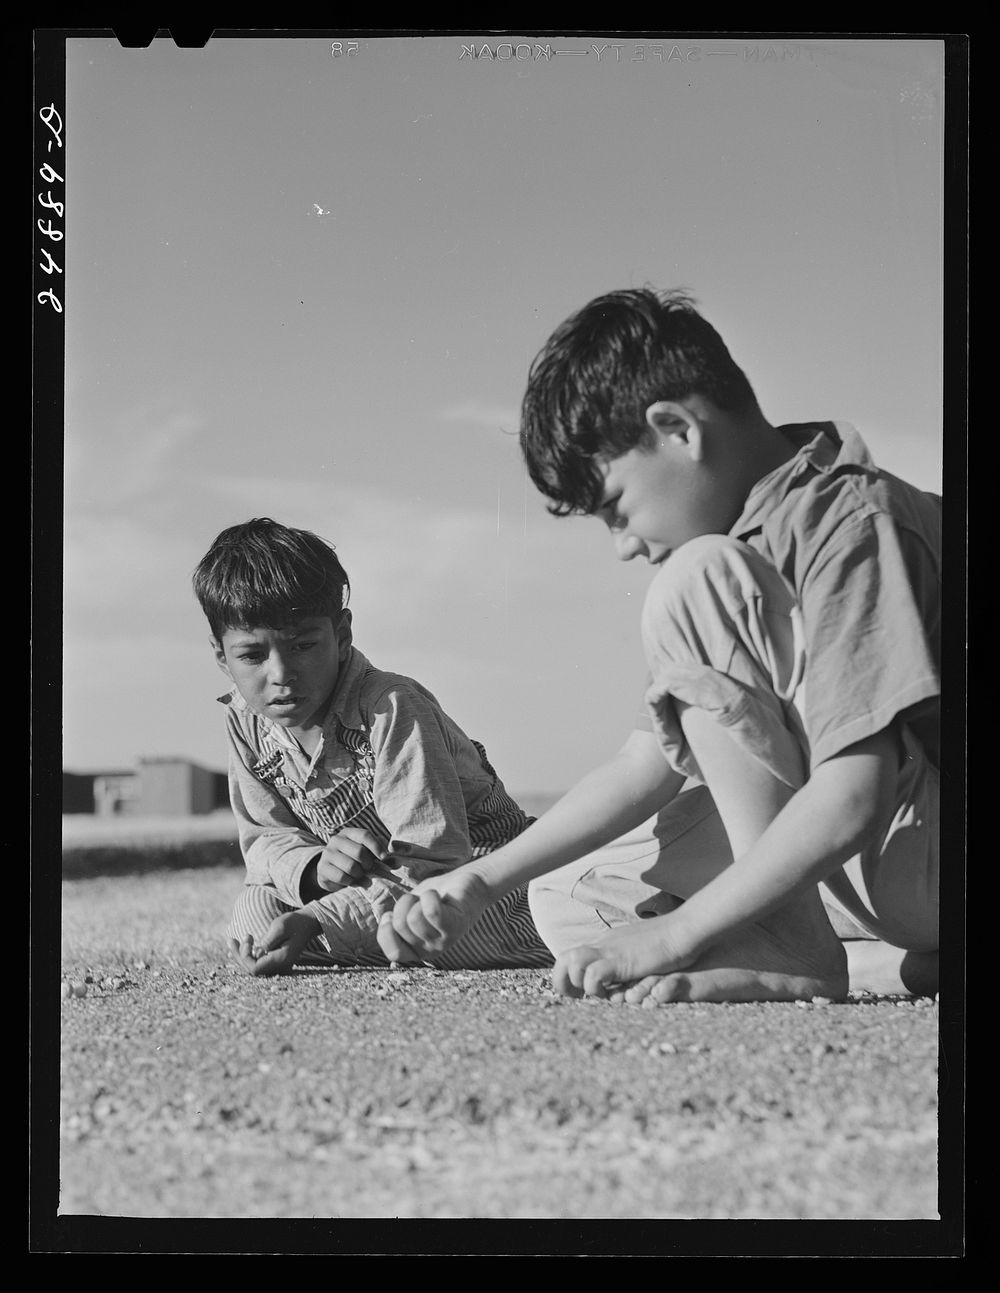 Marble game. FSA (Farm Security Administration) camp, Robstown, Texas. Sourced from the Library of Congress.